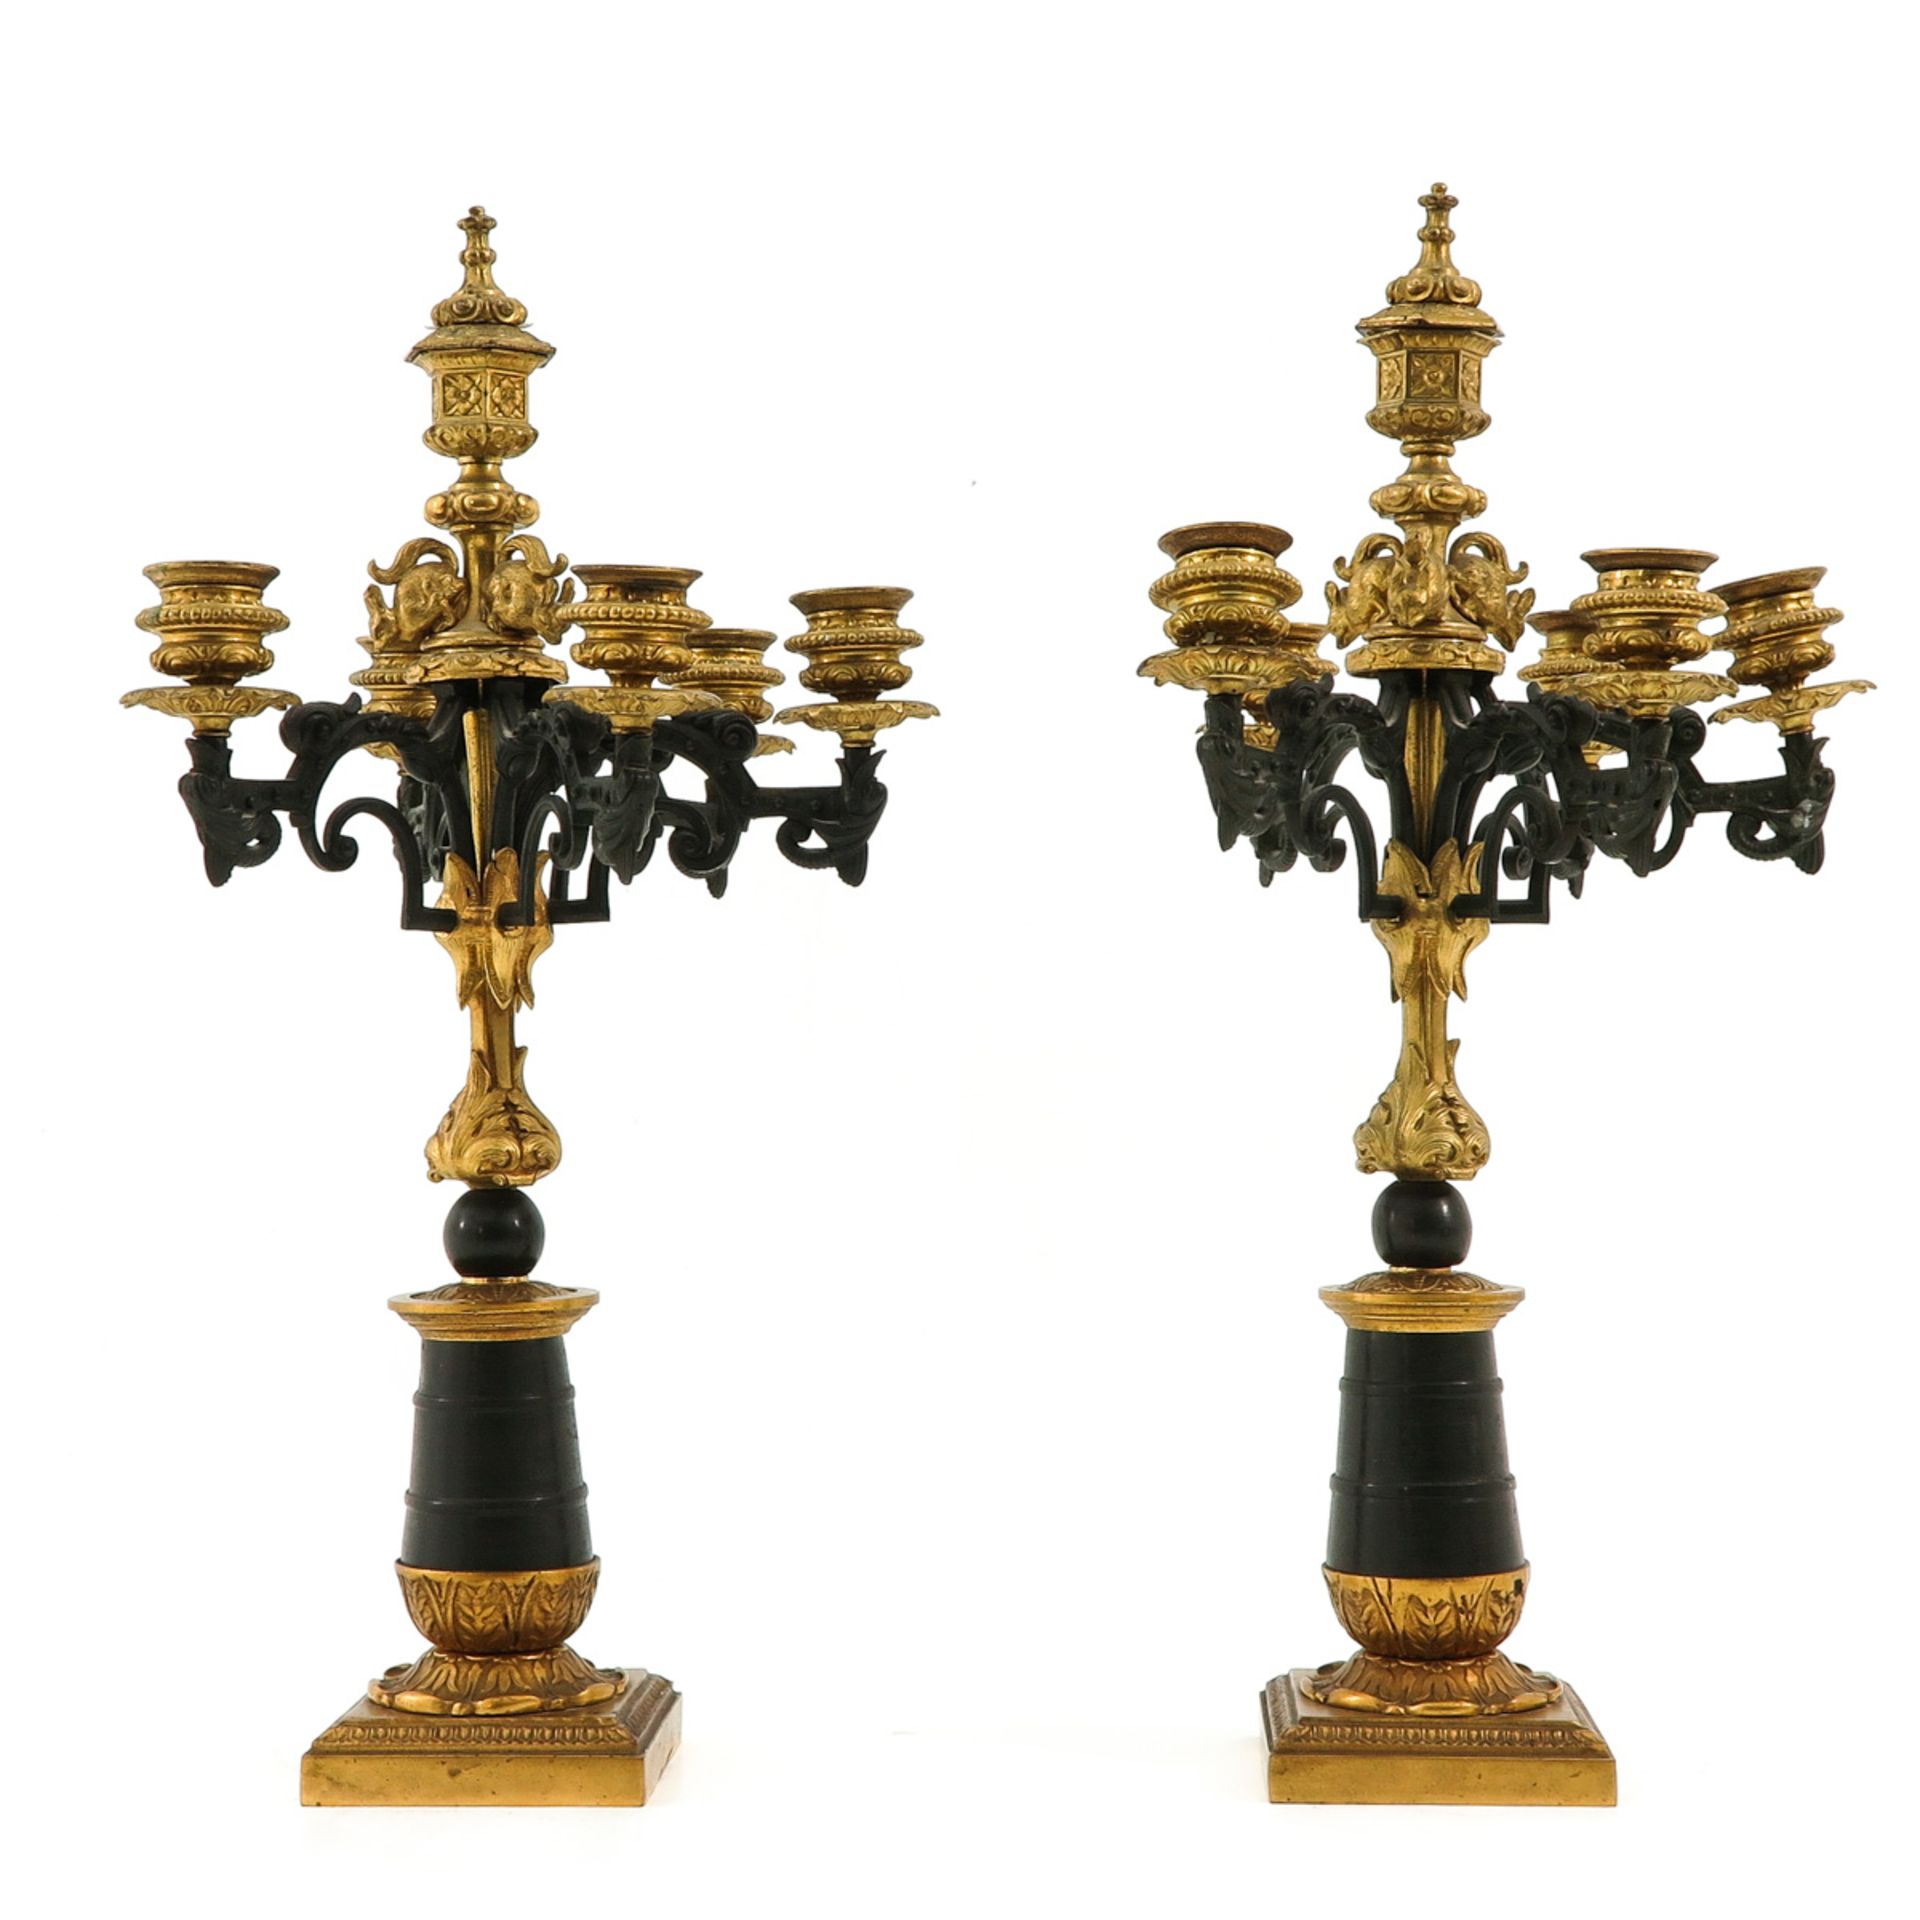 A Pair of Candlesticks - Image 4 of 6